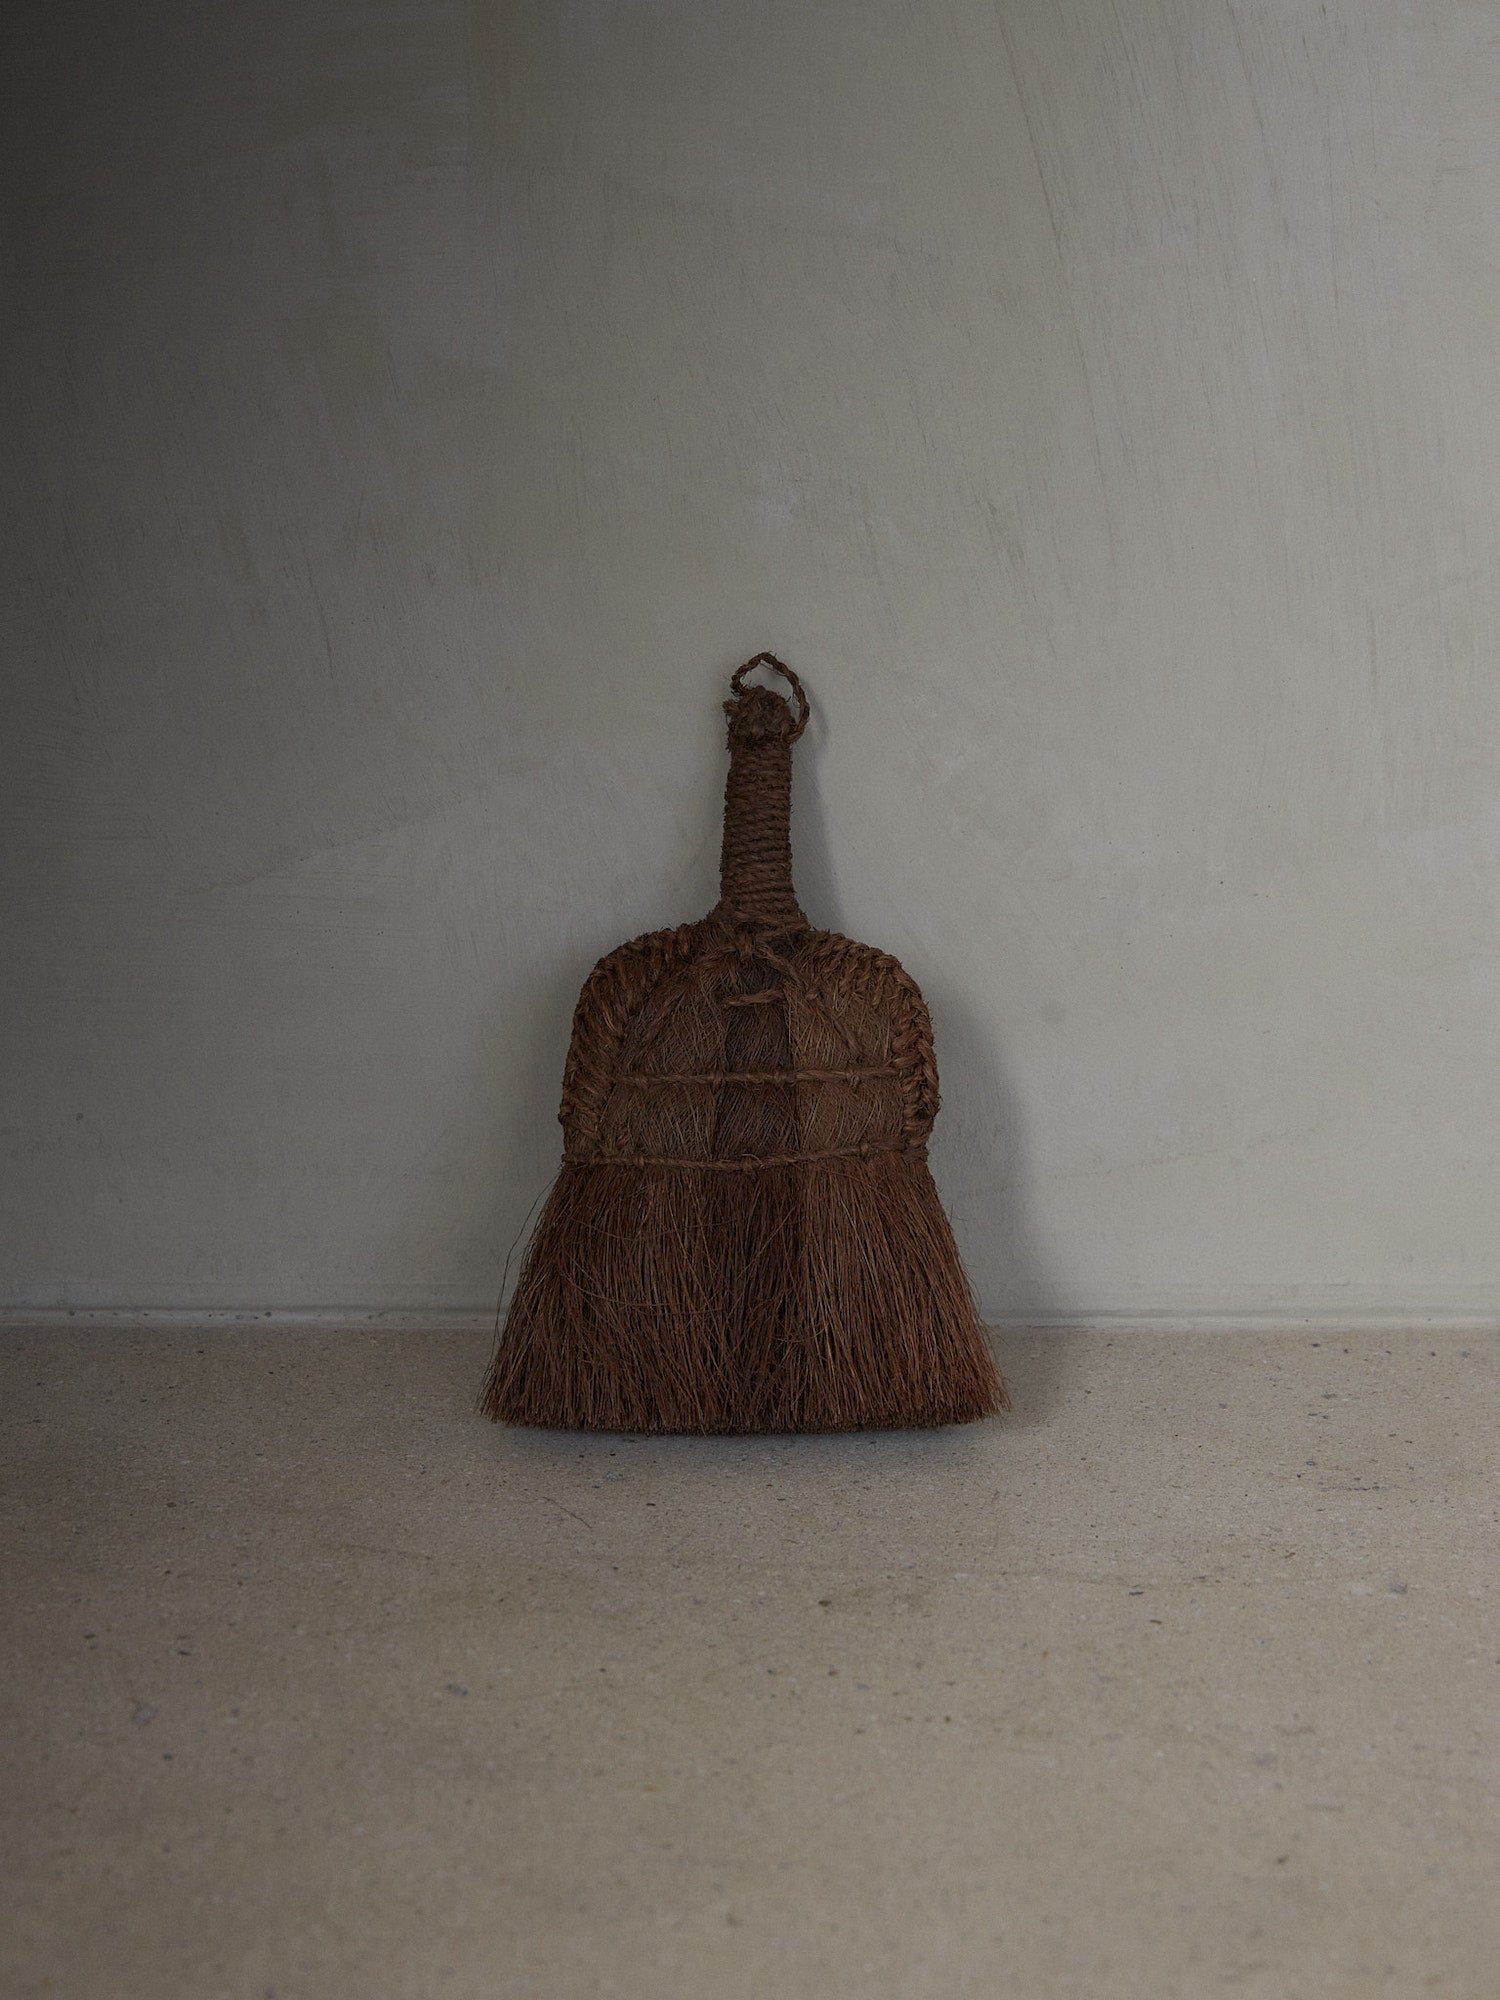 Hand Held Vintage Broom. Rare find. Natural hand held broom with a short woven handle hand crafted of fine Indian Palm fibers for a light, clean sweep.